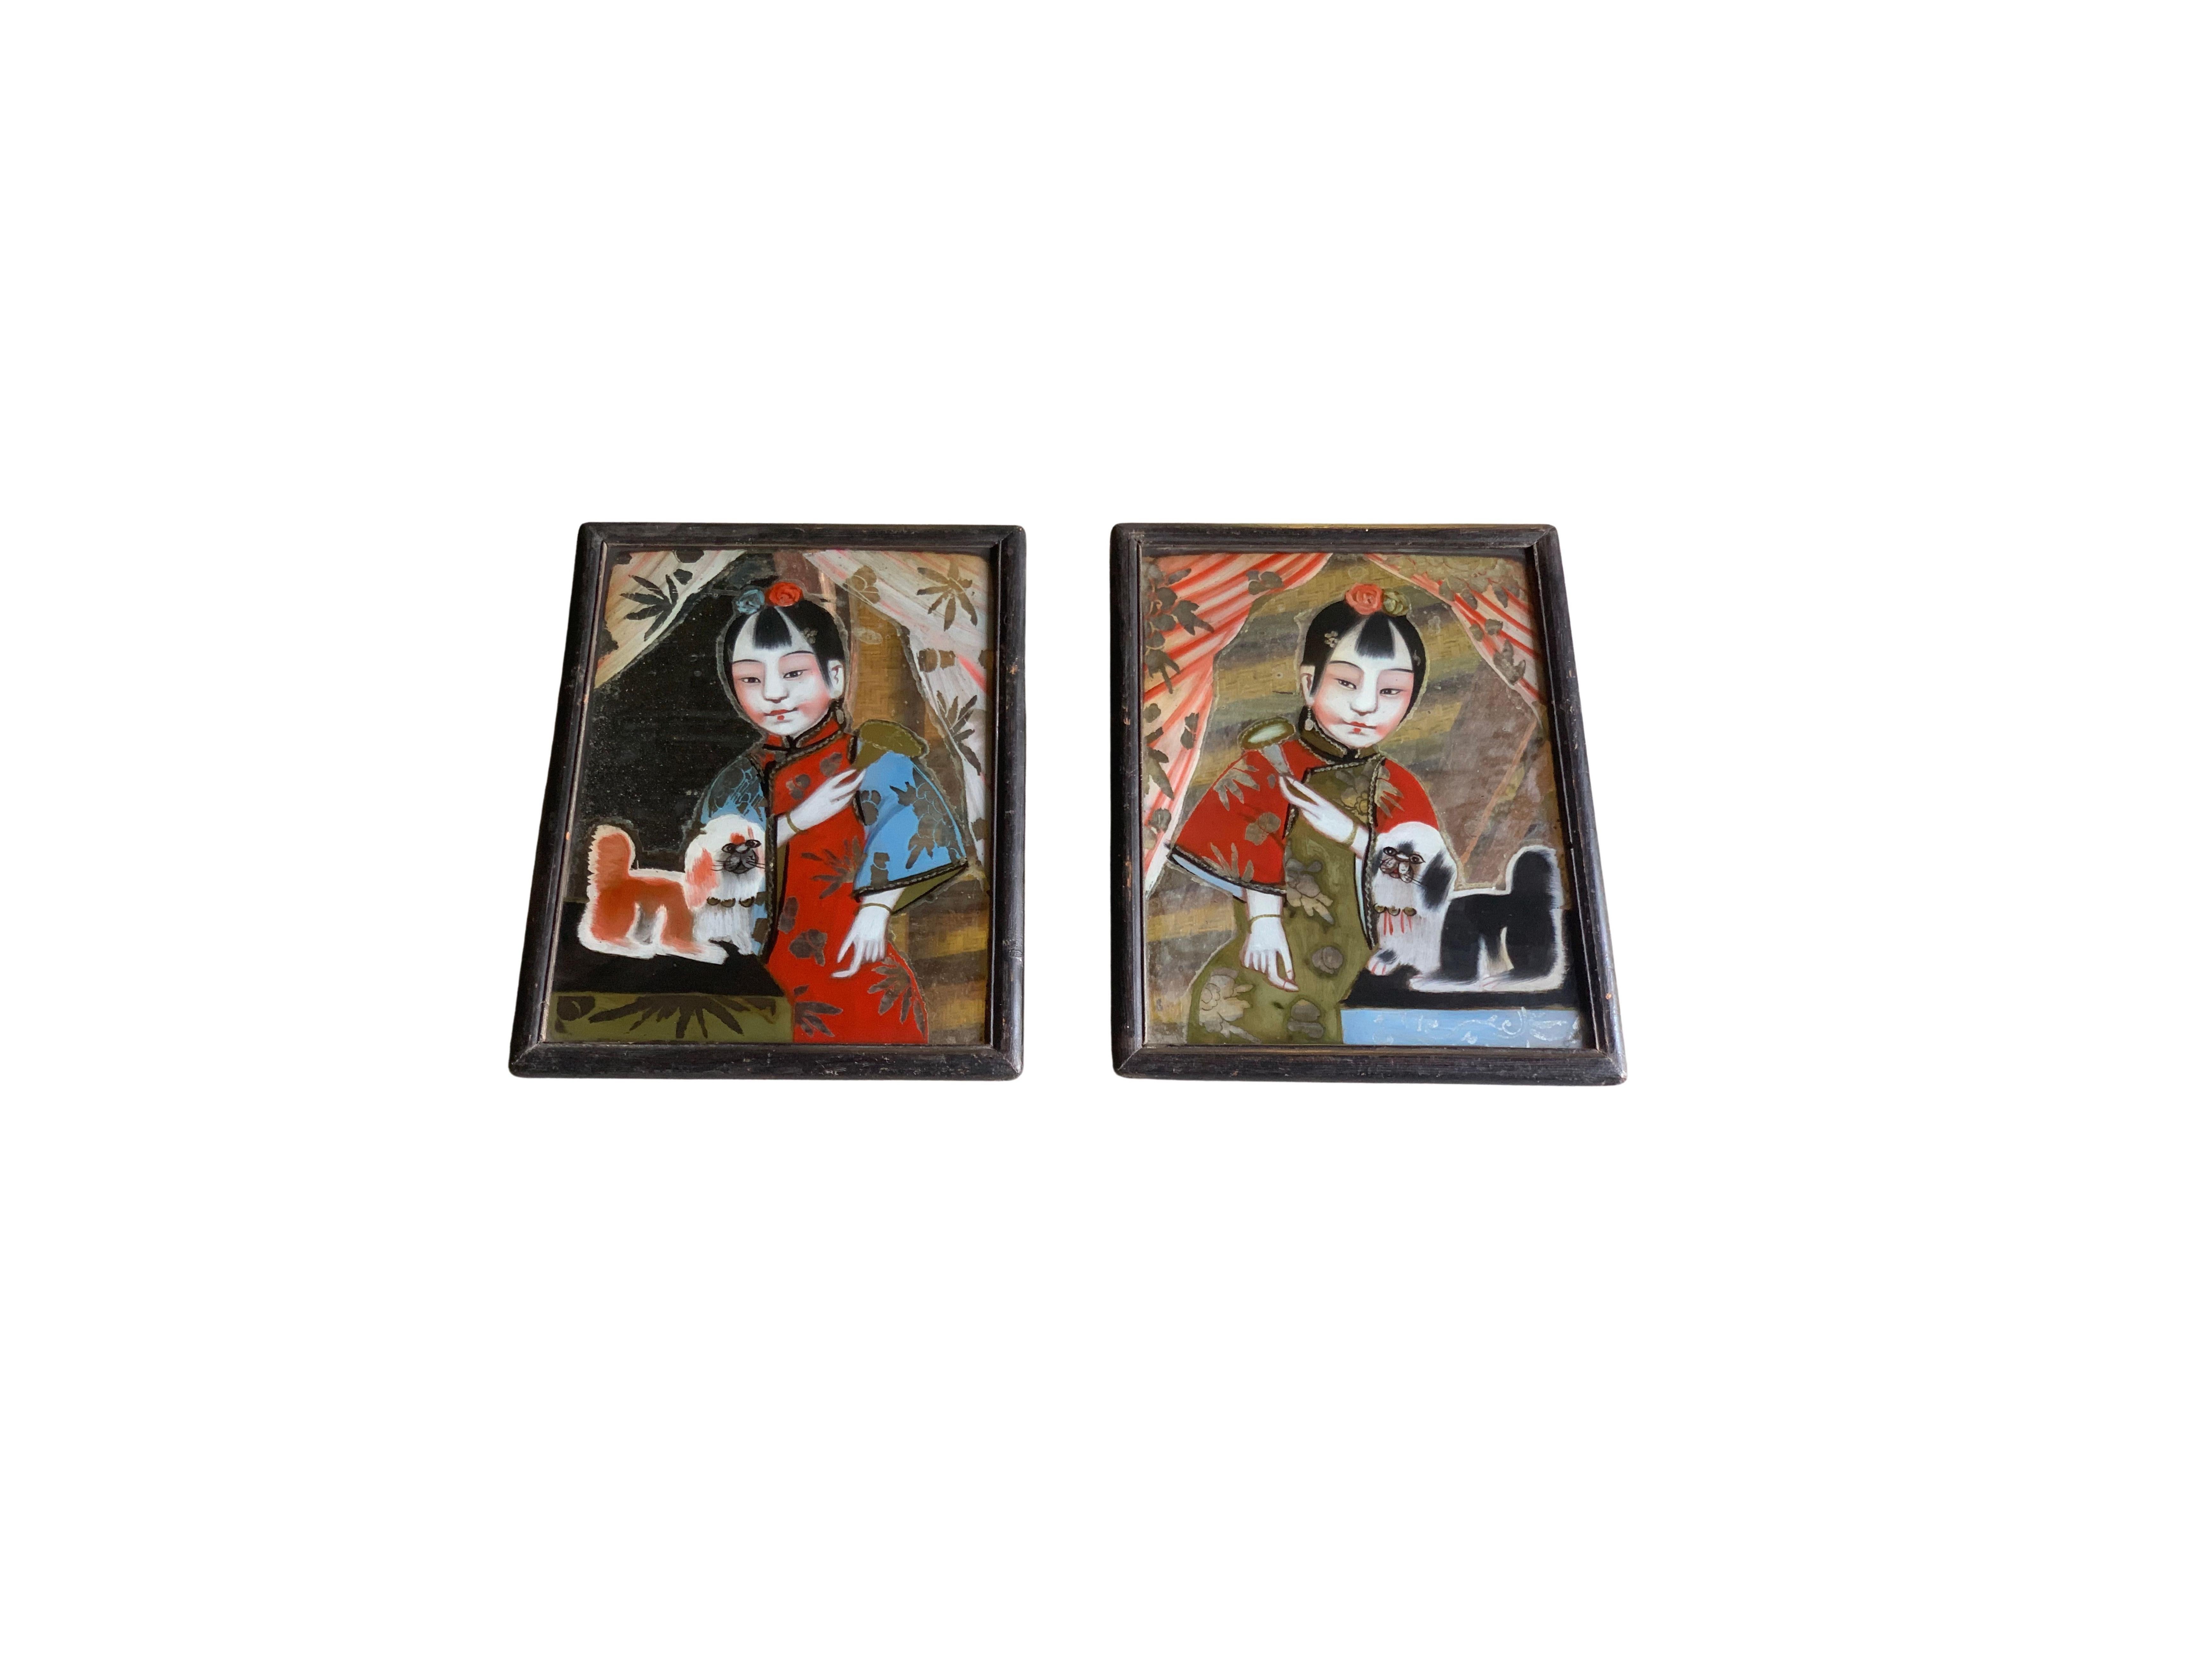 This pair of Chinese portraits depicting young women & their dogs were painted using a reverse glass painting technique. Painting in reverse on the opposite side of a piece of glass meant the painter had to work in reverse. Unique to this pair of